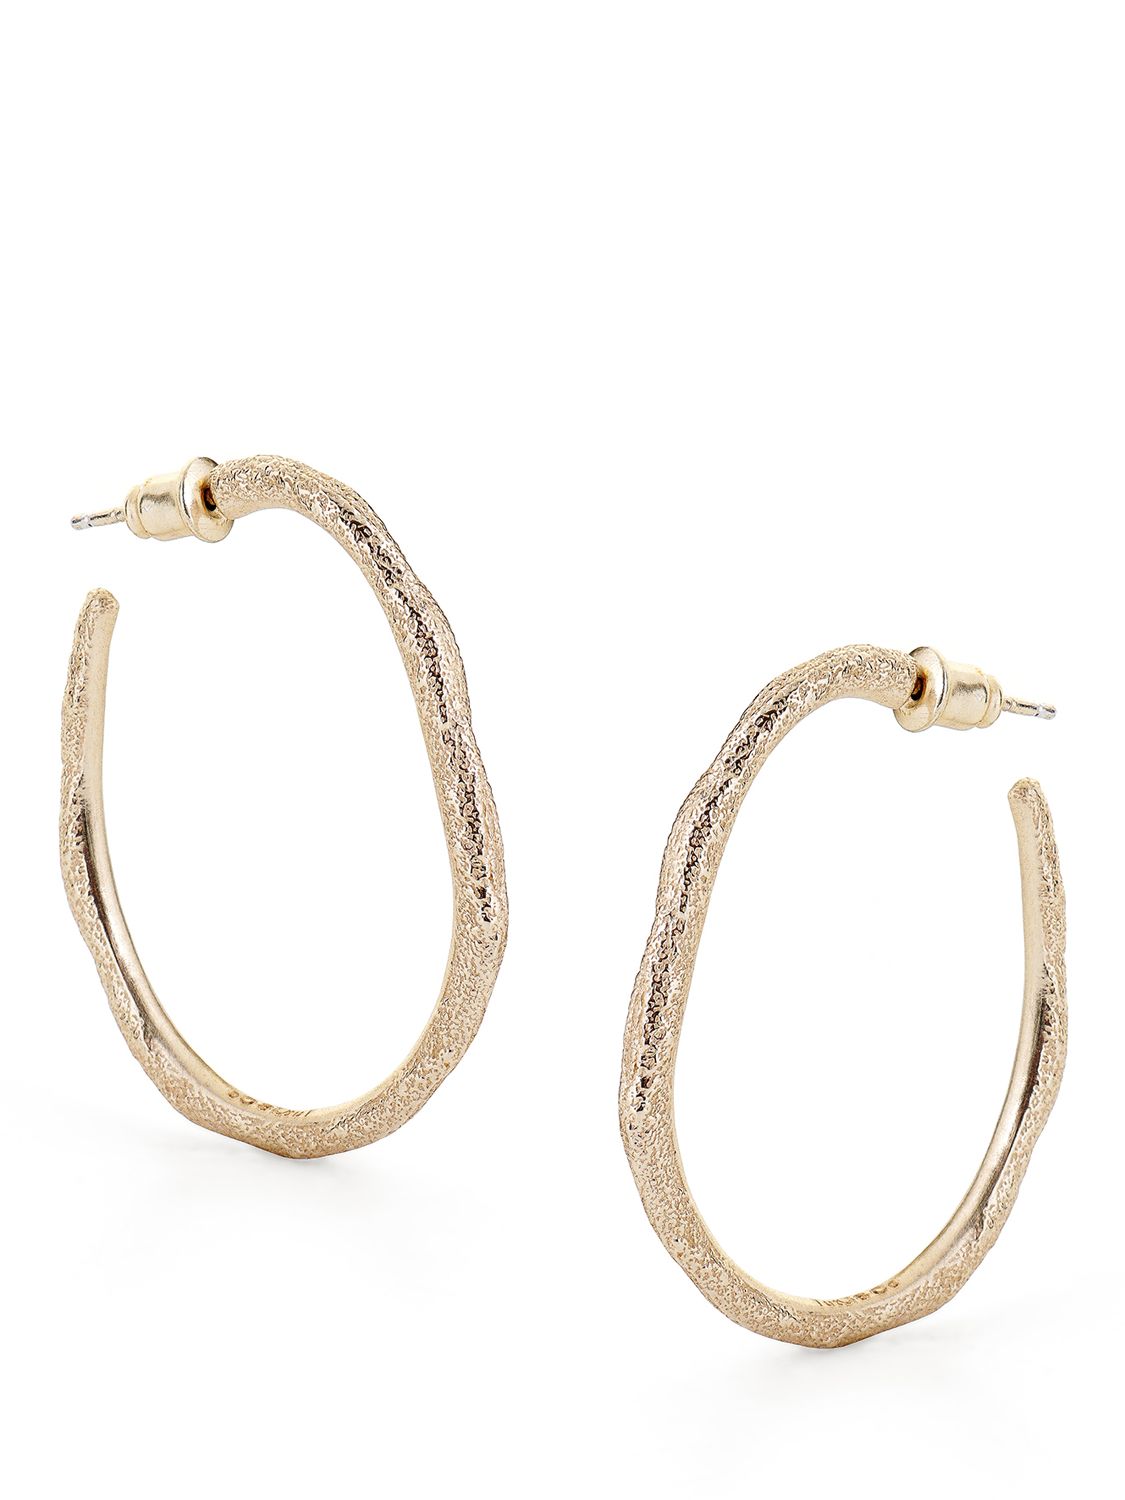 Tutti & Co Uneven Waved Hoop Earrings, Gold at John Lewis & Partners